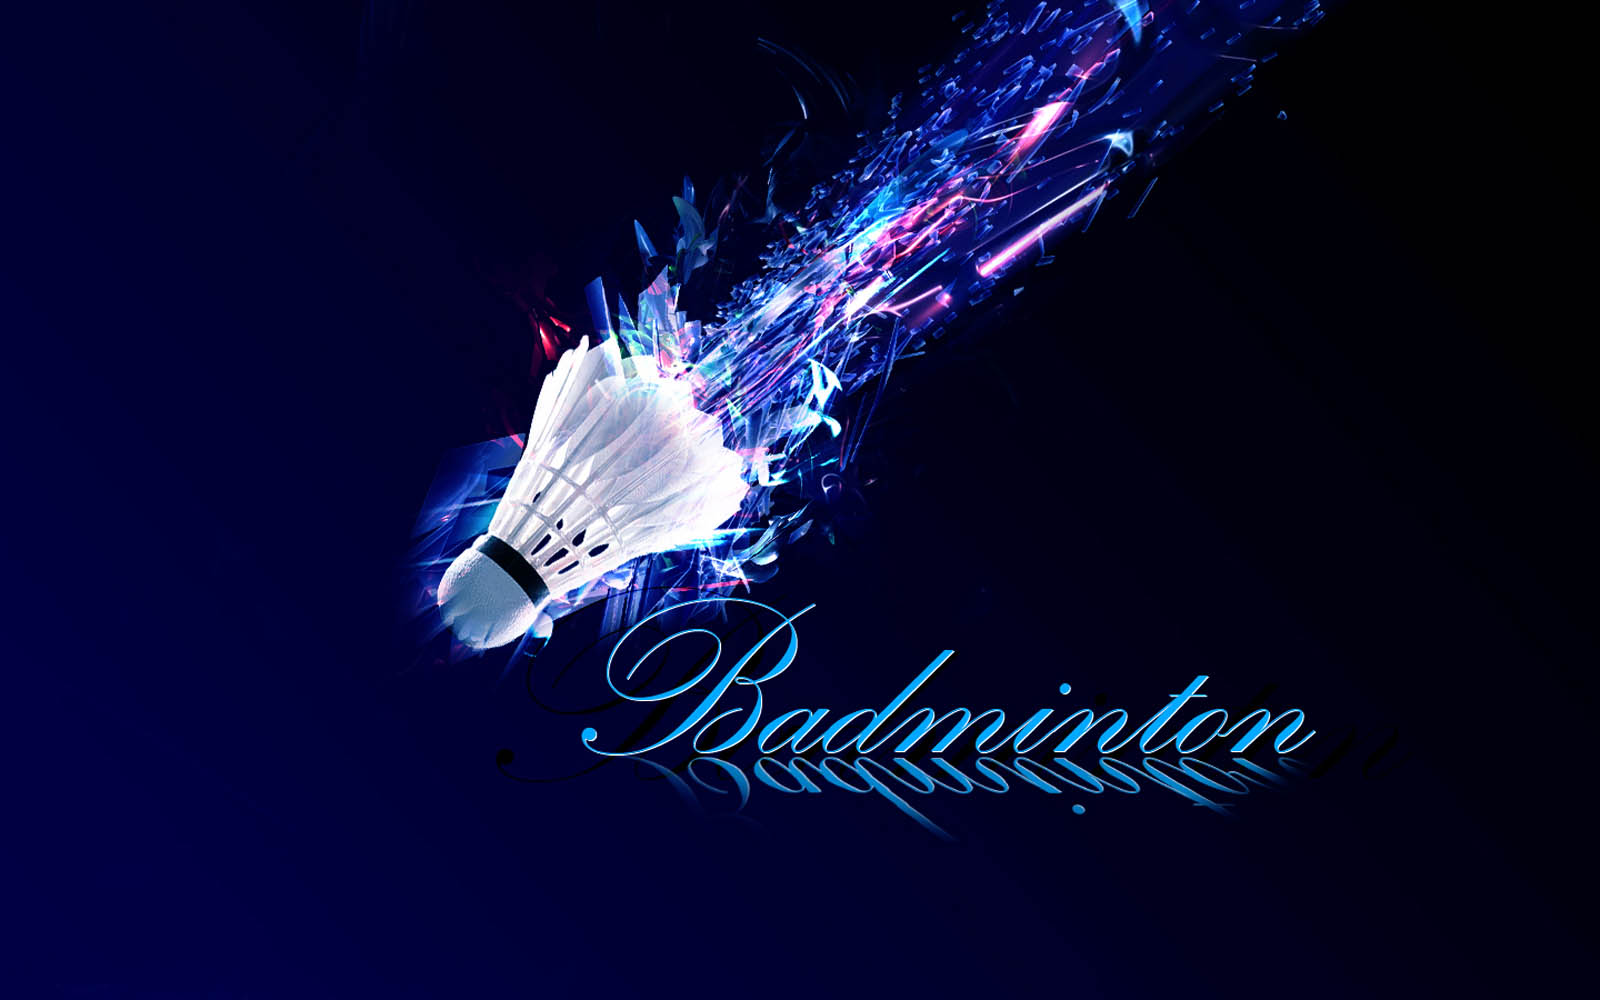 Tag Badminton Wallpaper Background Photos Image And Pictures For